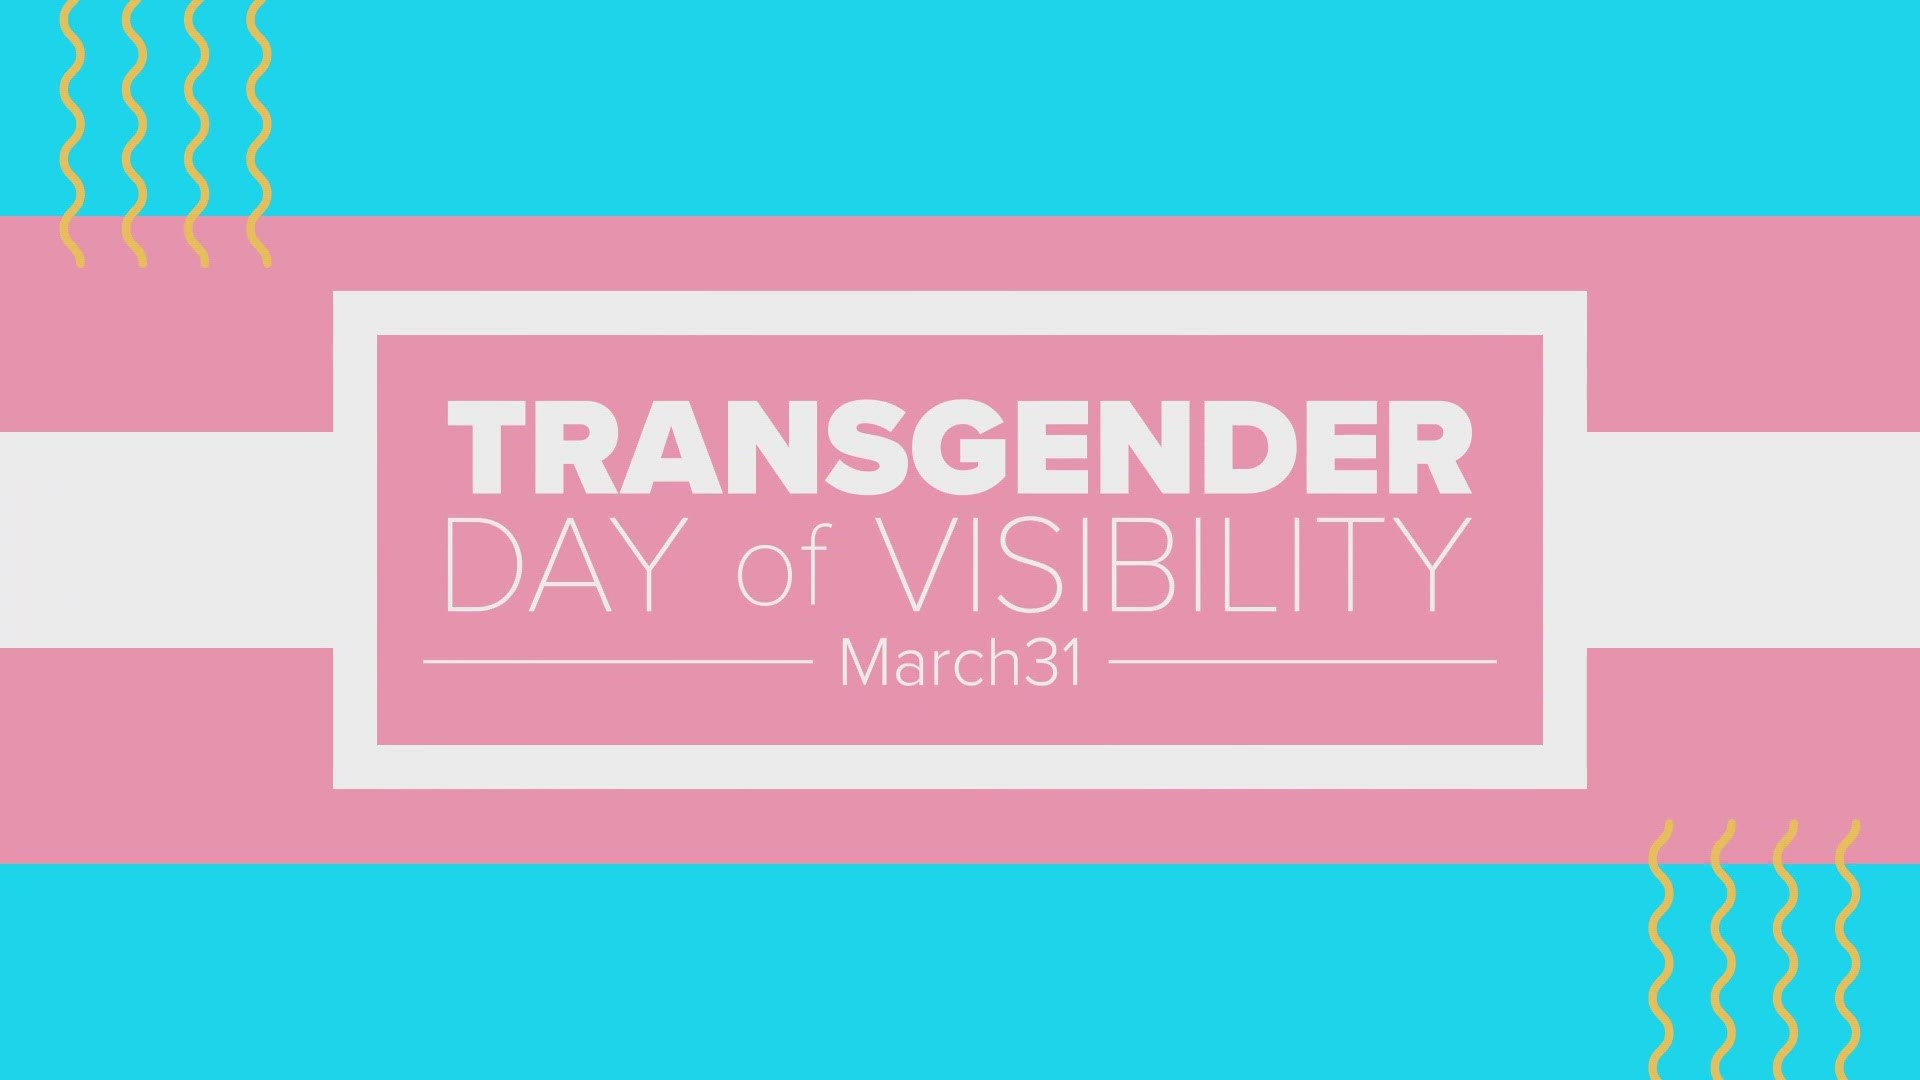 Transgender Day of Visibility has been observed each year on March 31 since 2009.